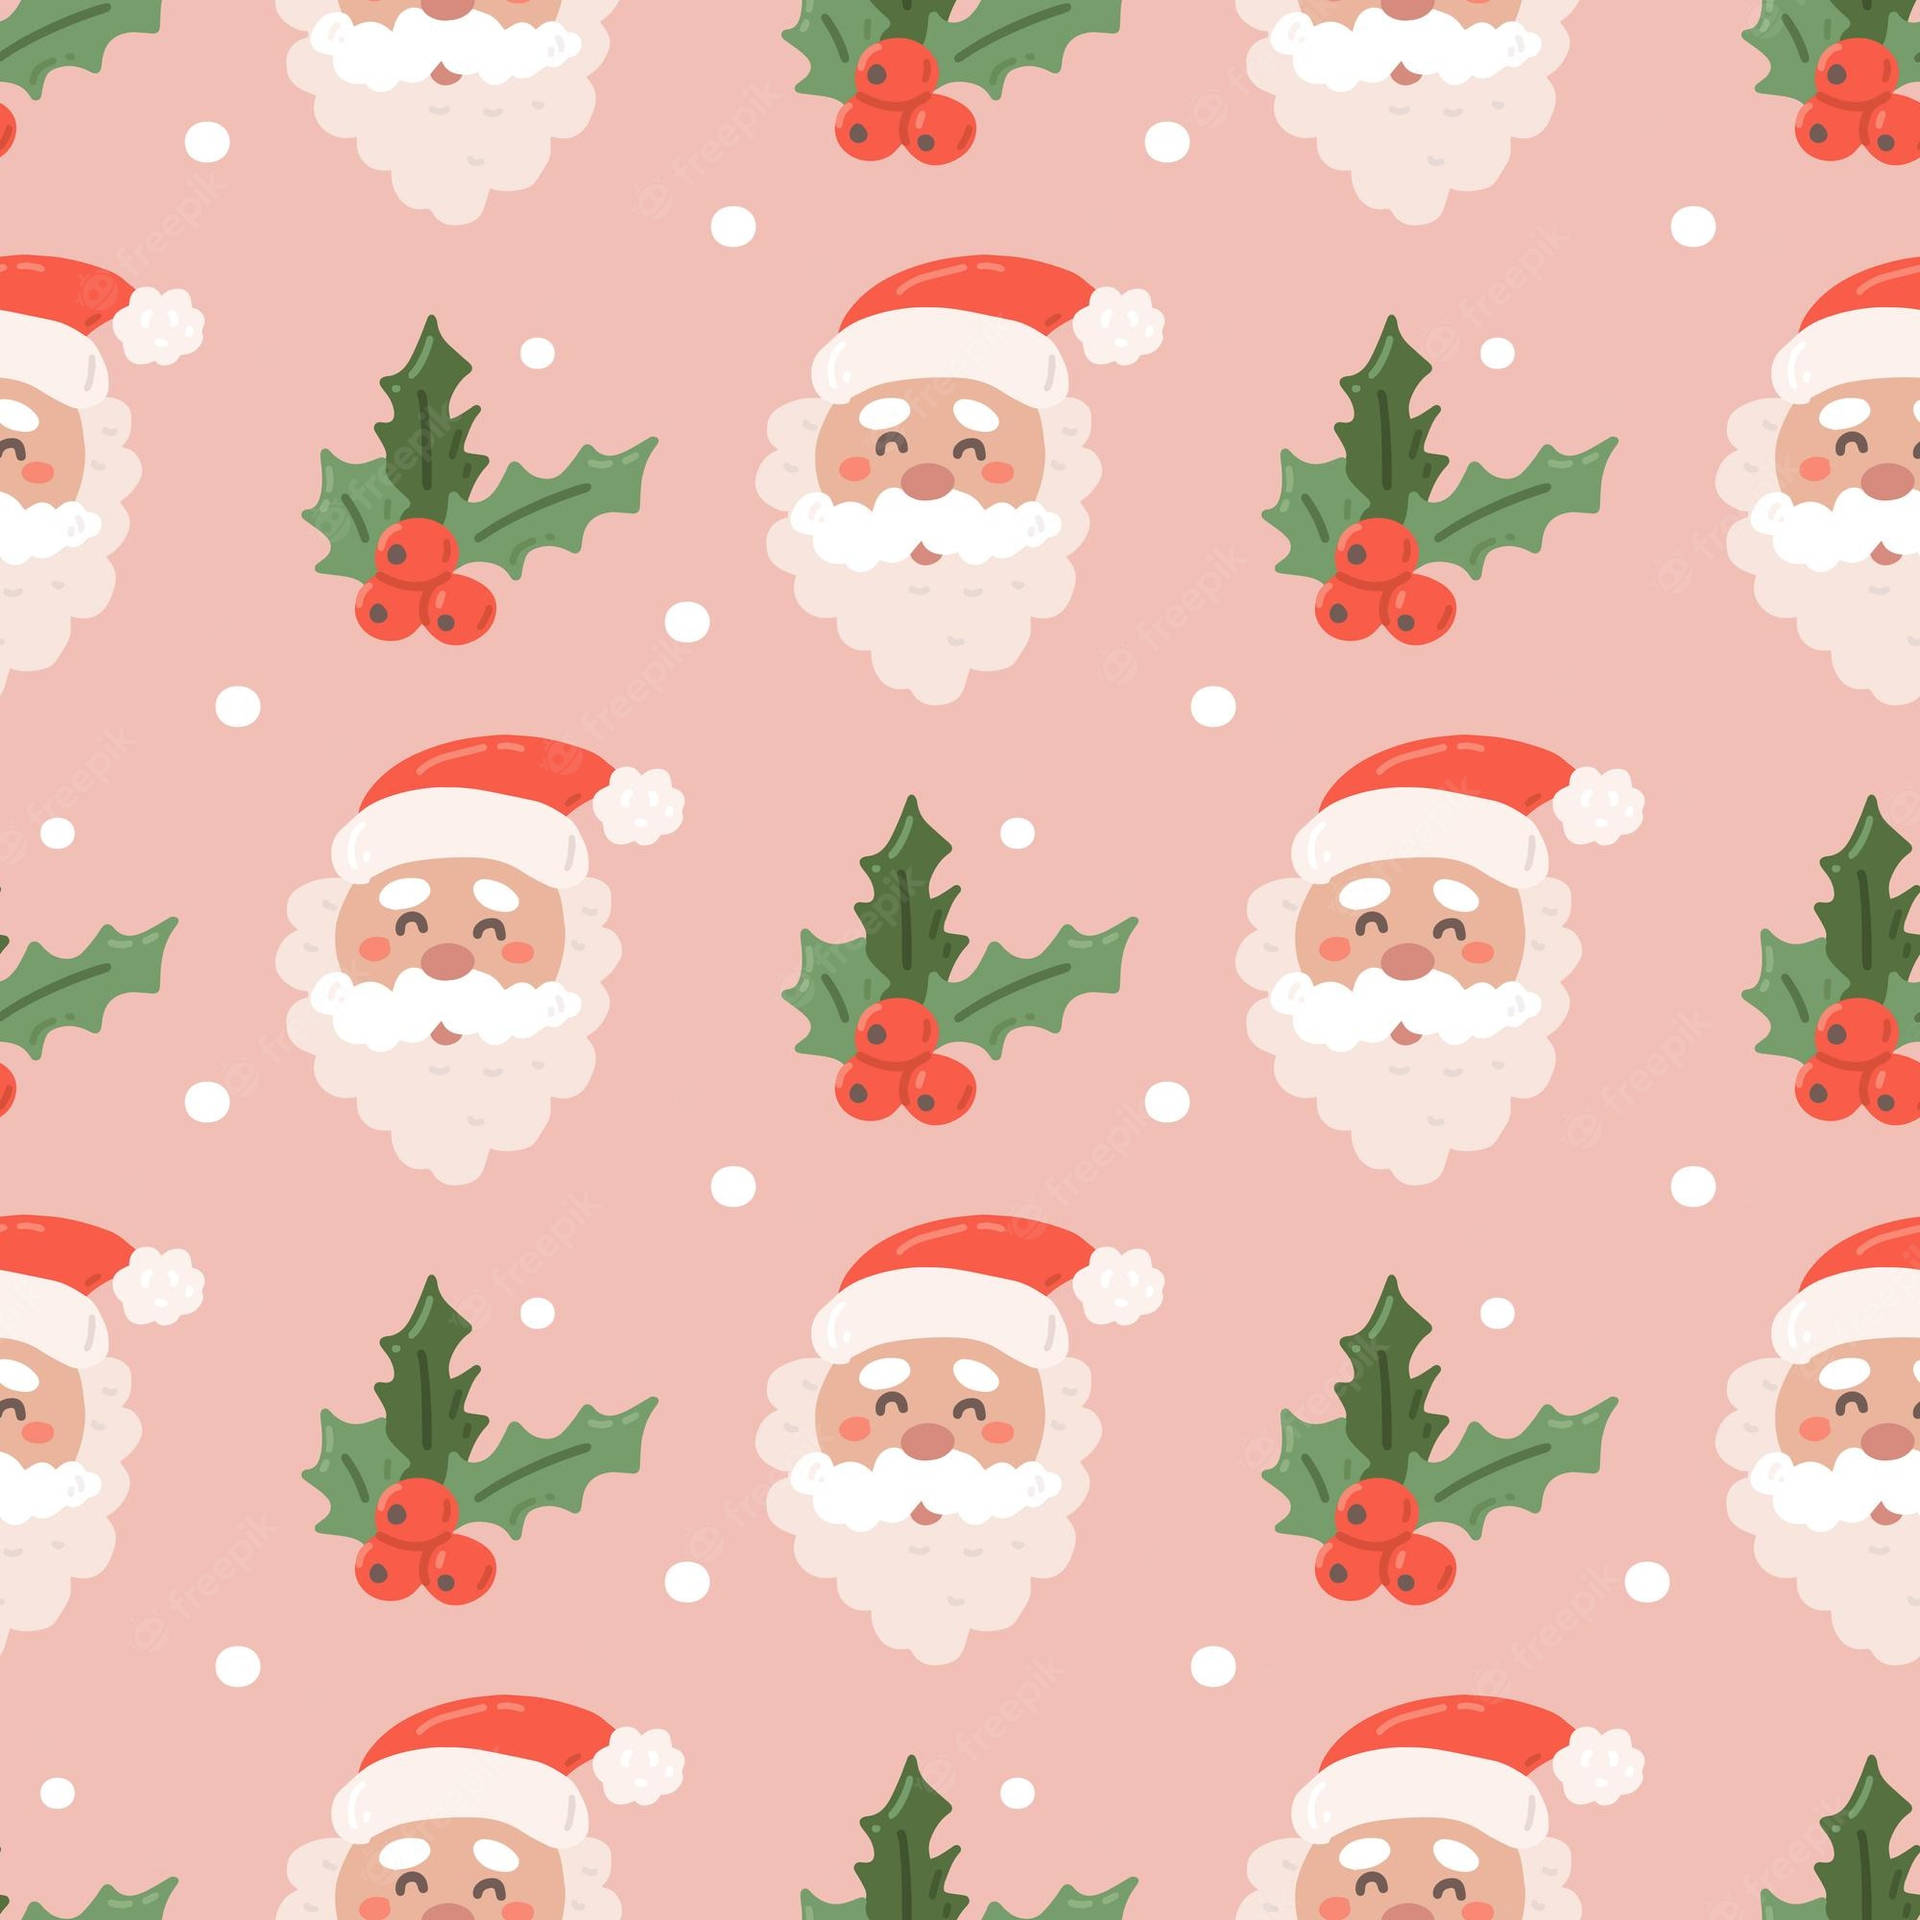 100+] Preppy Christmas Wallpapers